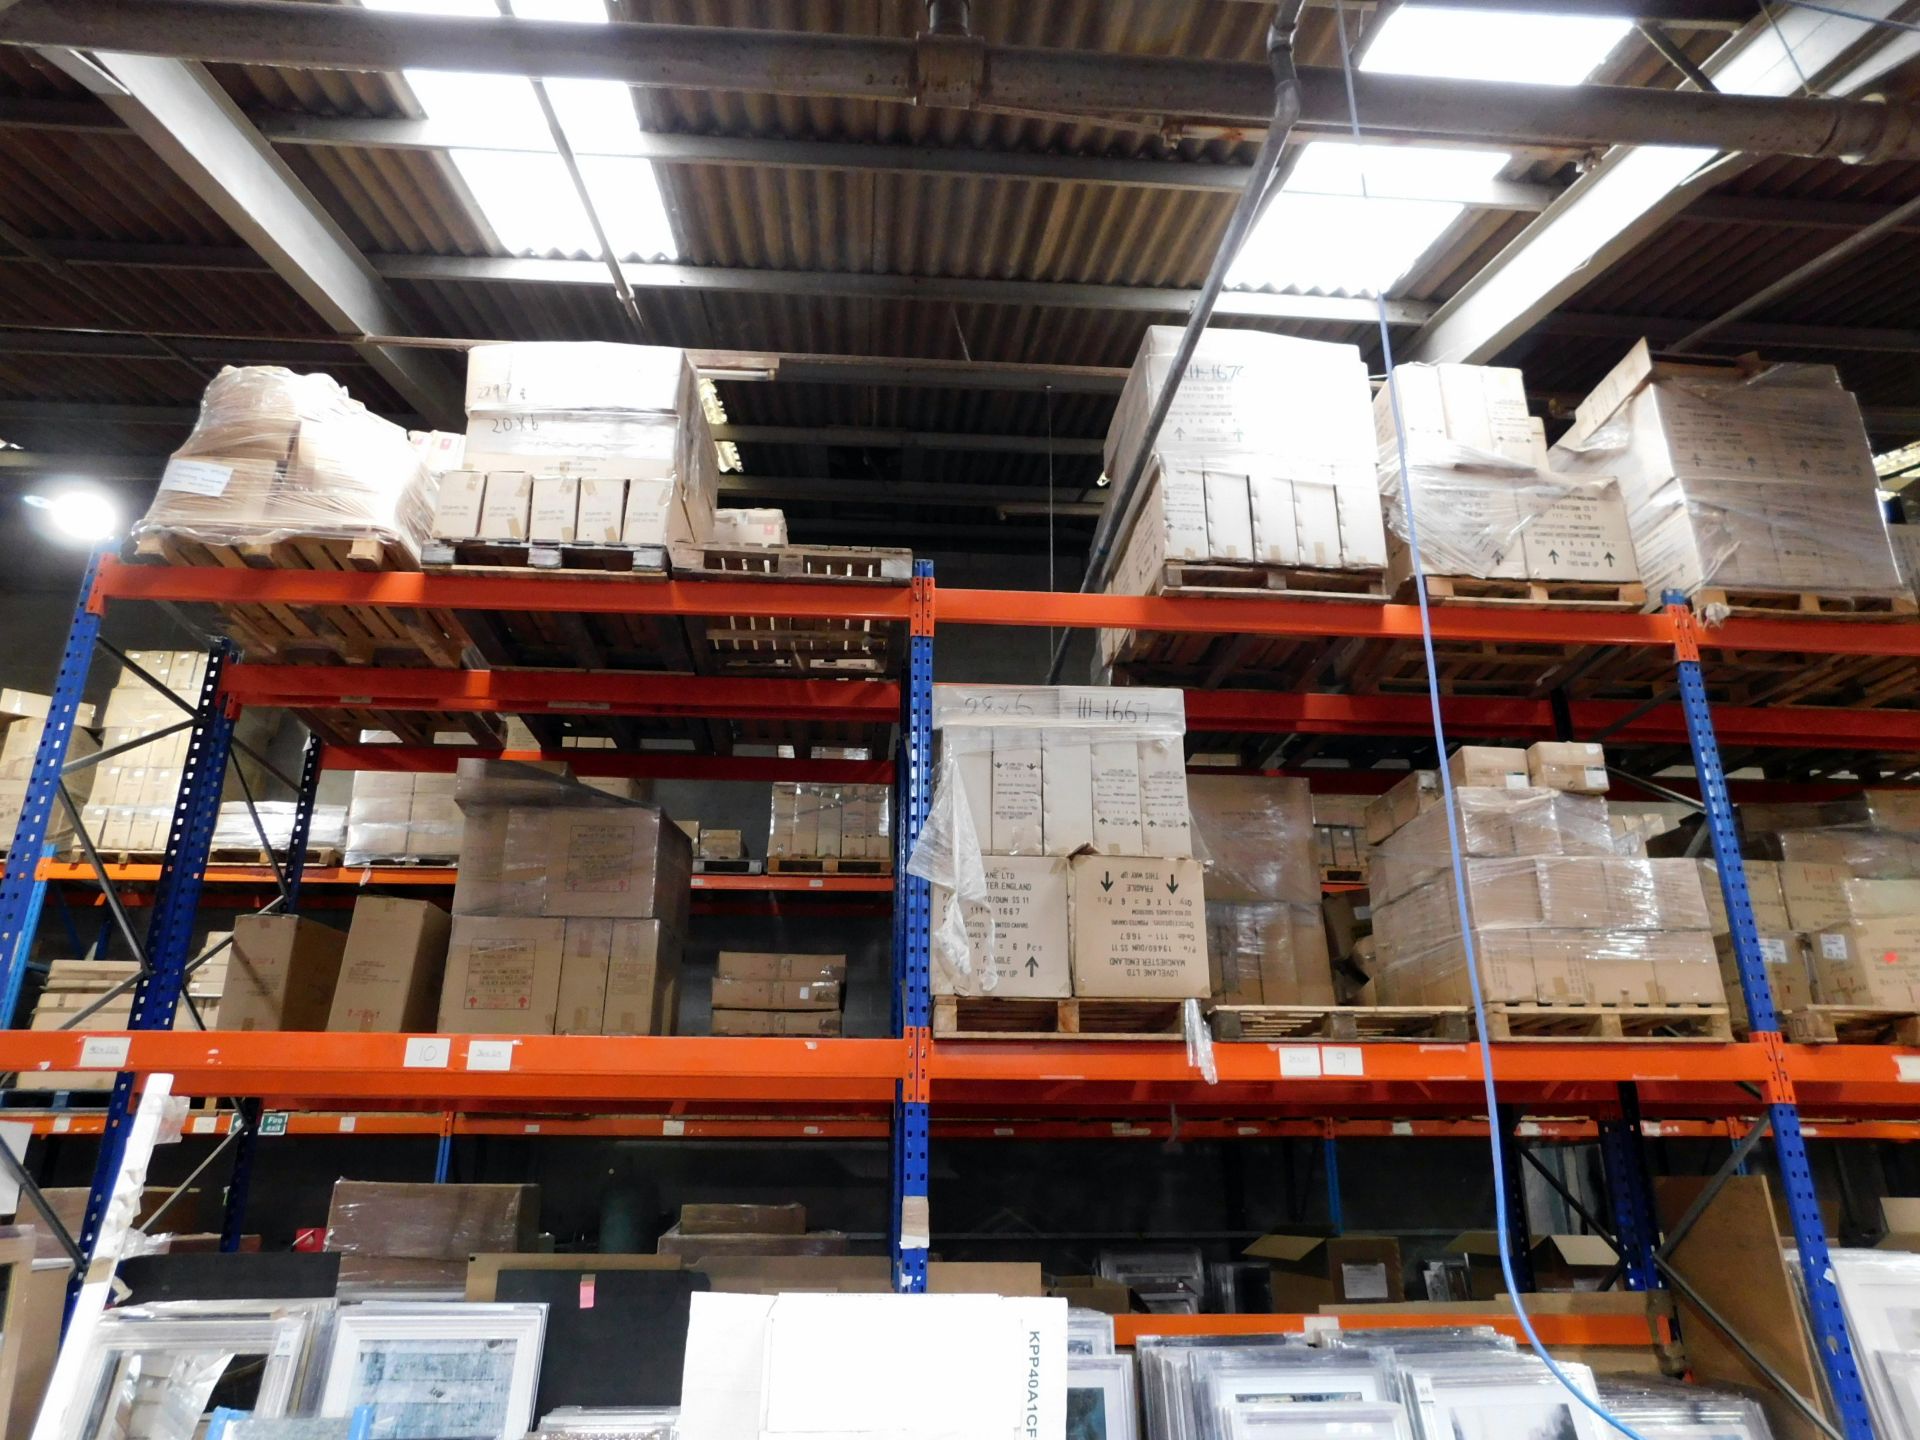 6 Bays of Boltless Pallet Racking to include: 7 4.2m Uprights, 24 Crossbeams (Collection – Wednesday - Image 4 of 4